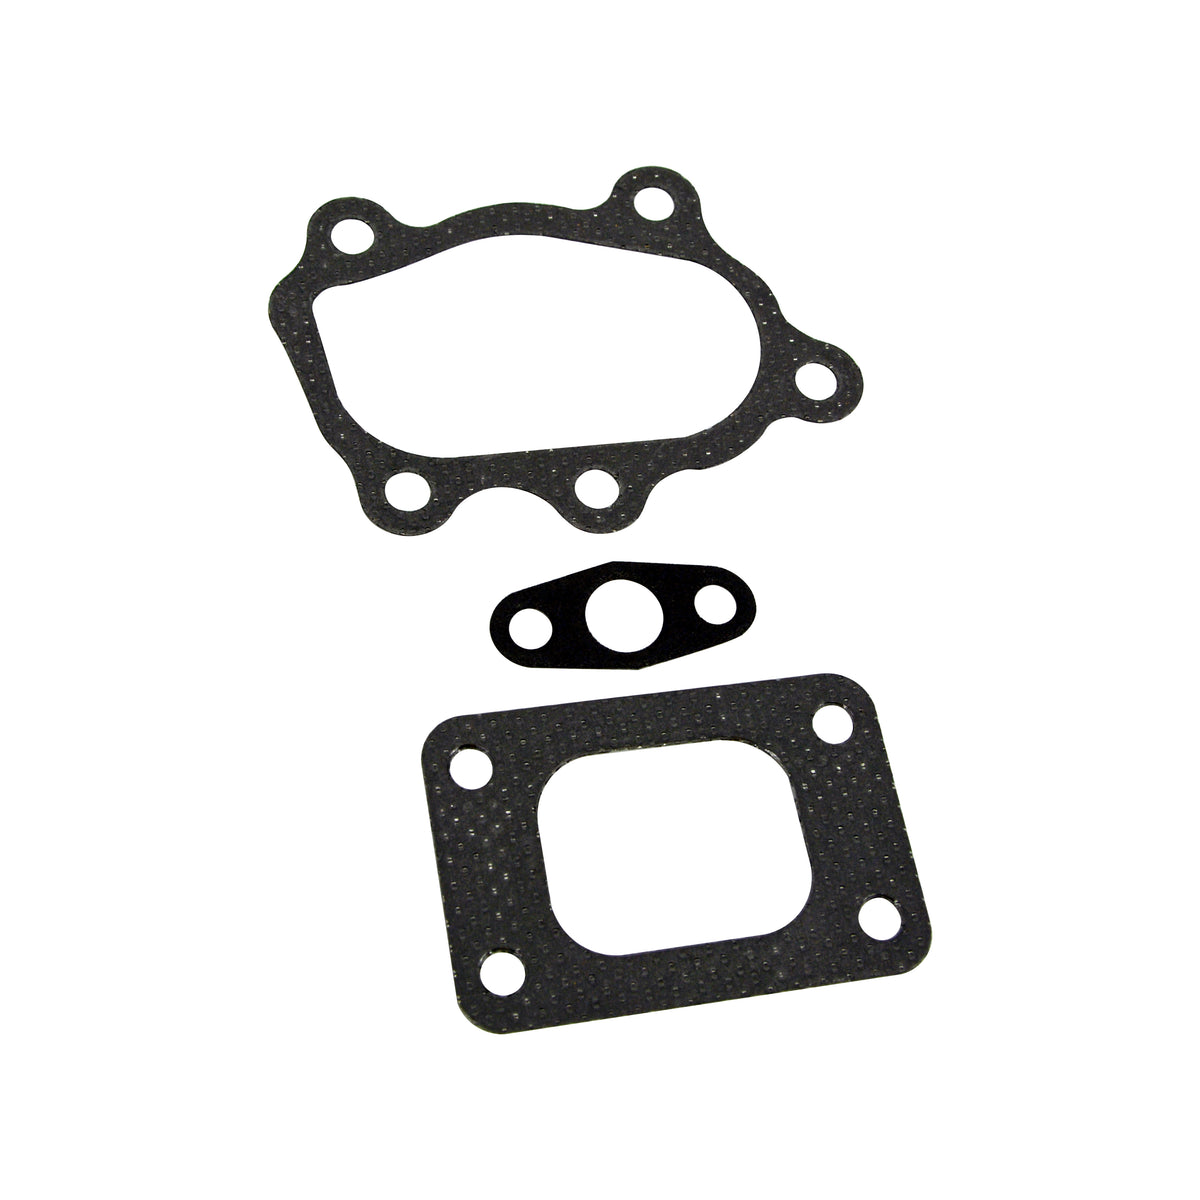 Trask Stage 2 Twin Cam or M8 turbo only gasket kit (GT25+GT28) | TM-3009-A